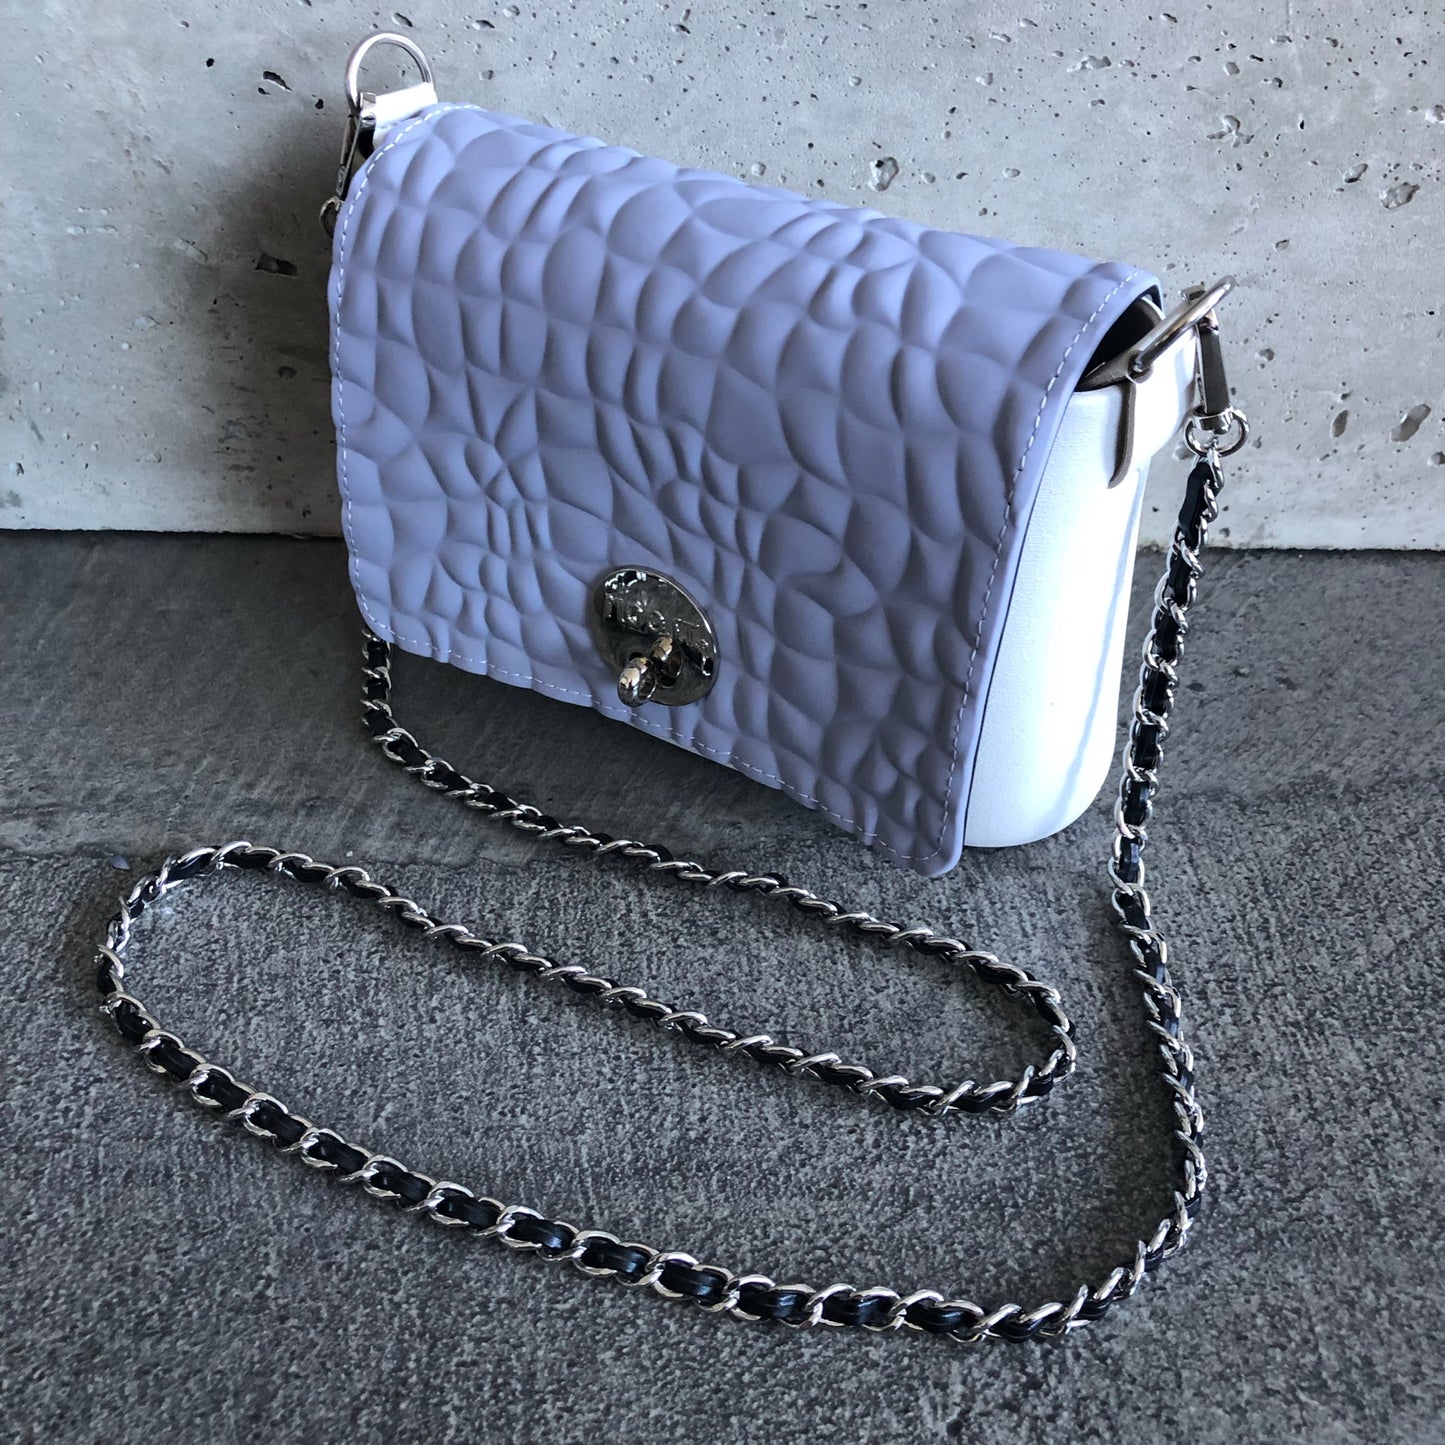 Periwinkle on White with Interwoven Chain